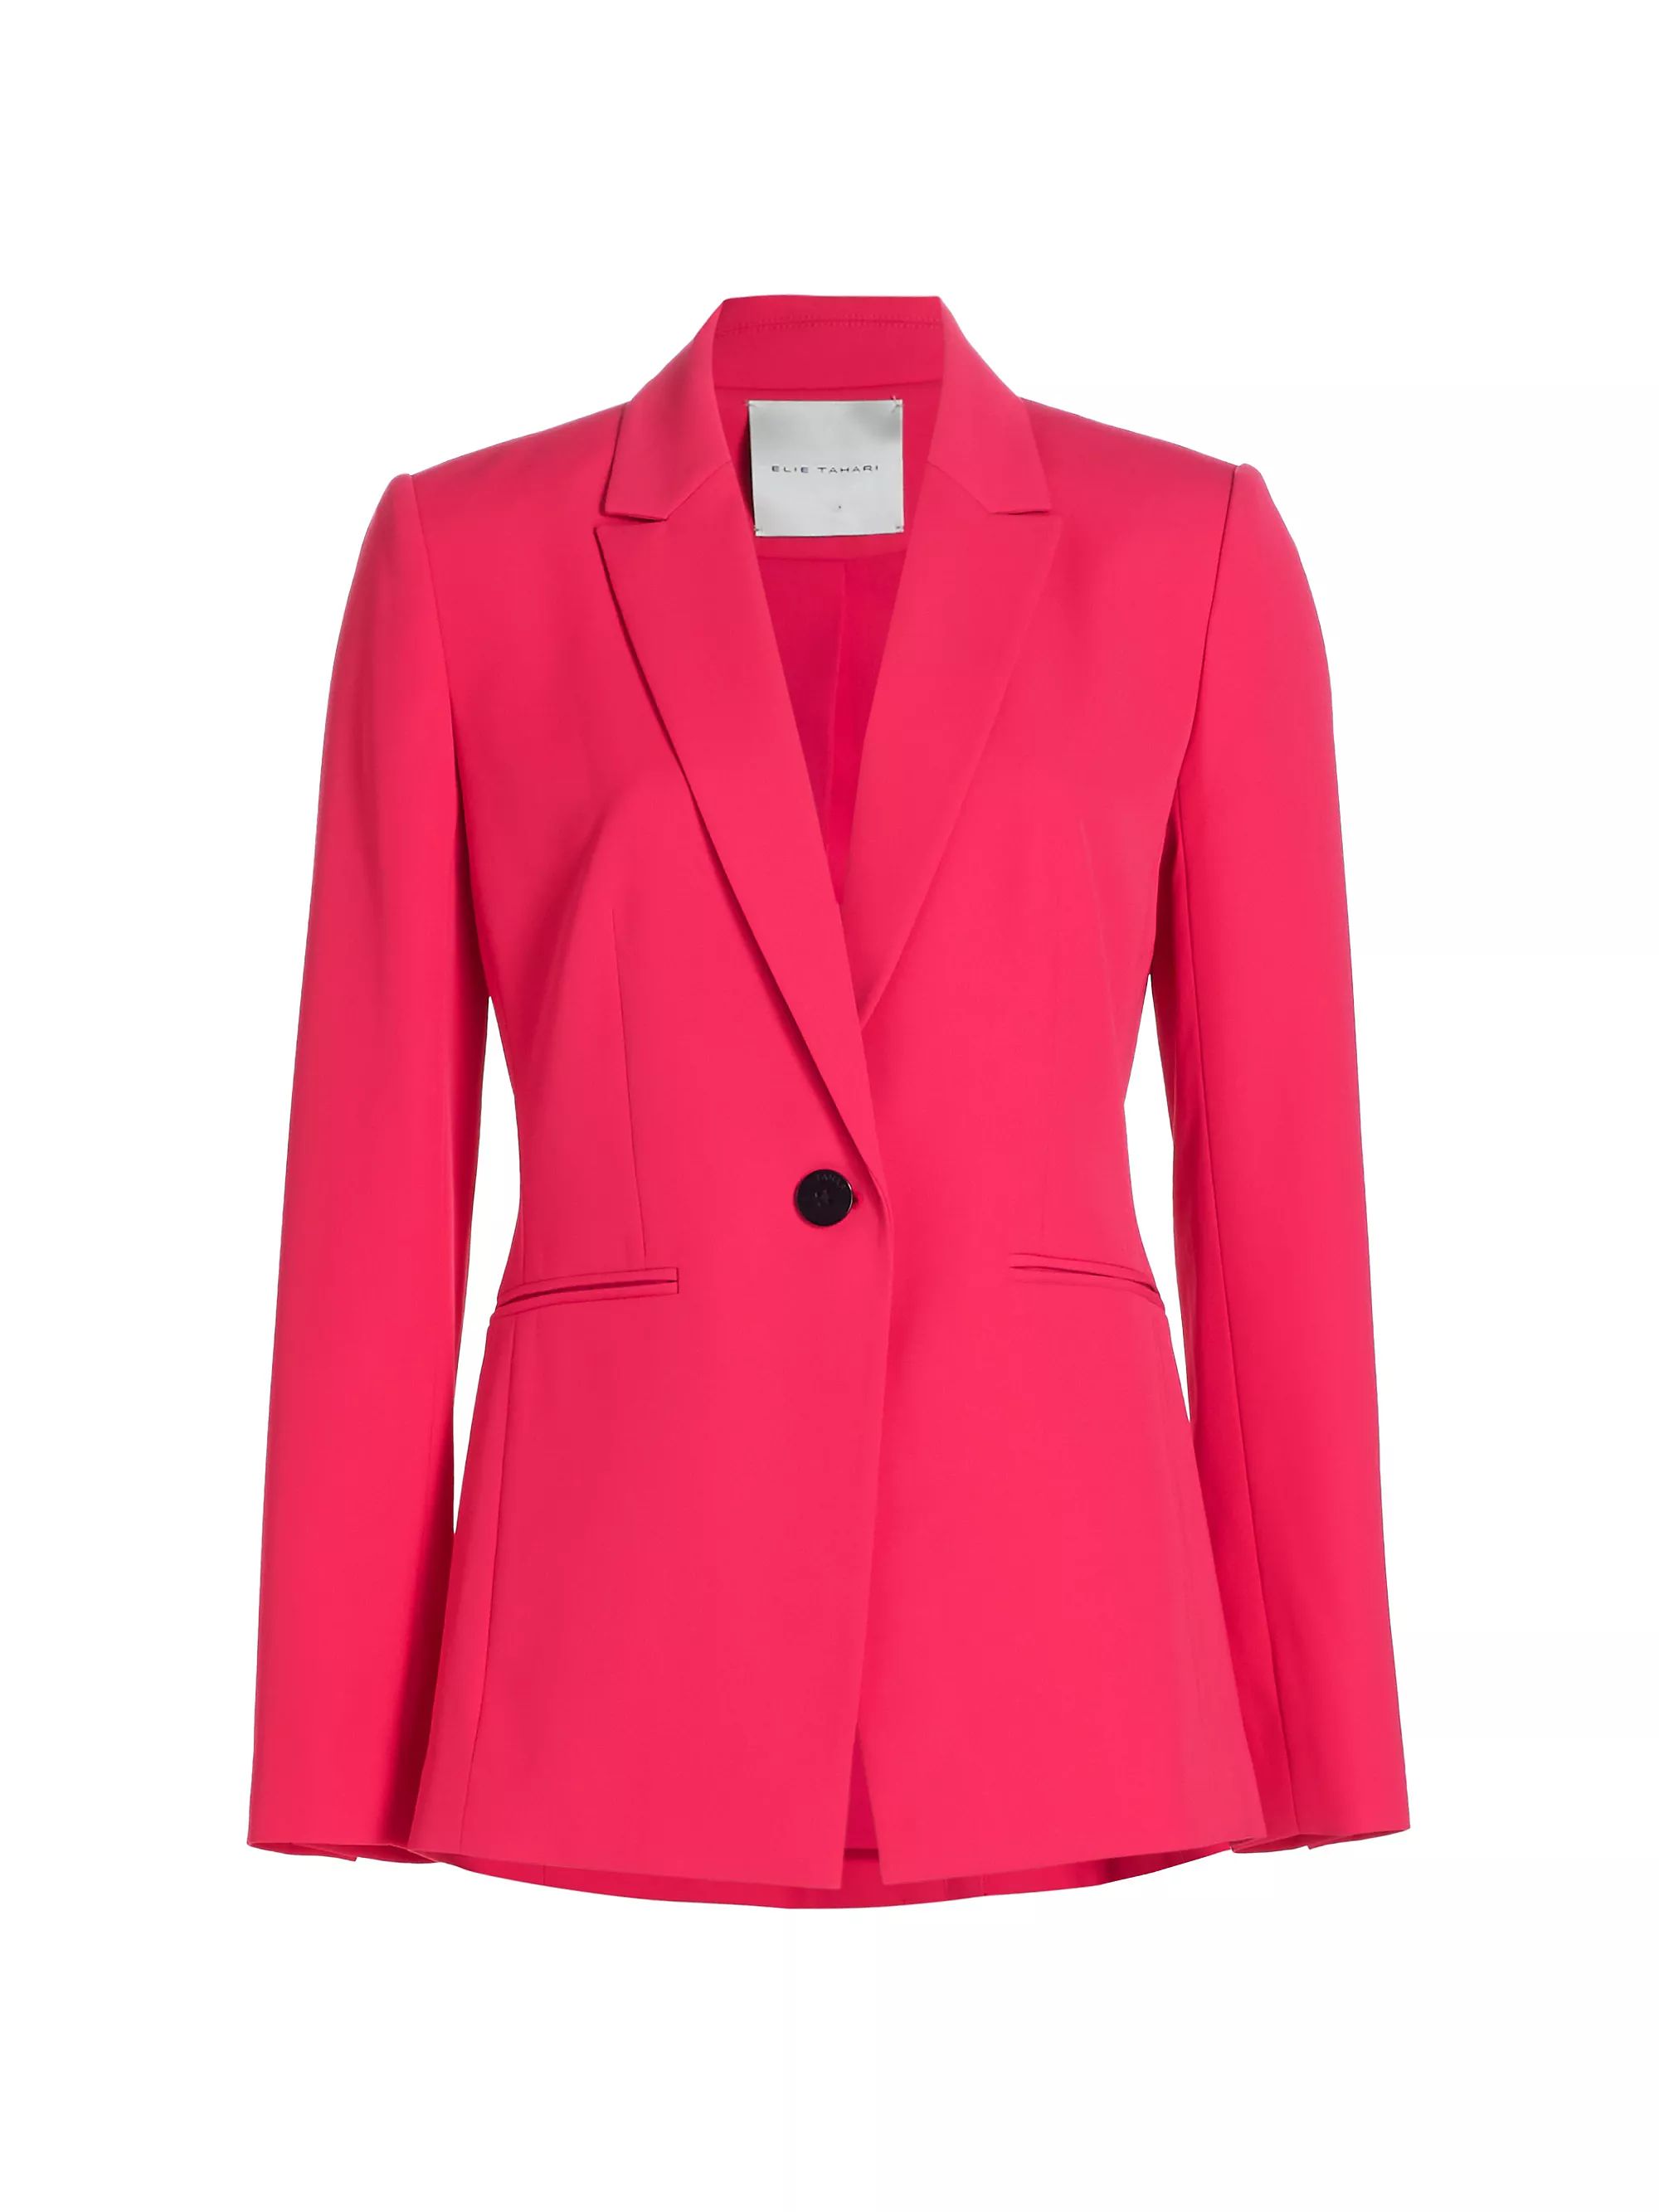 Jaipur PinkAll BlazersElie TahariThe Tiffany Tailored Blazer$395SELECT SIZE Free Shipping on $20... | Saks Fifth Avenue